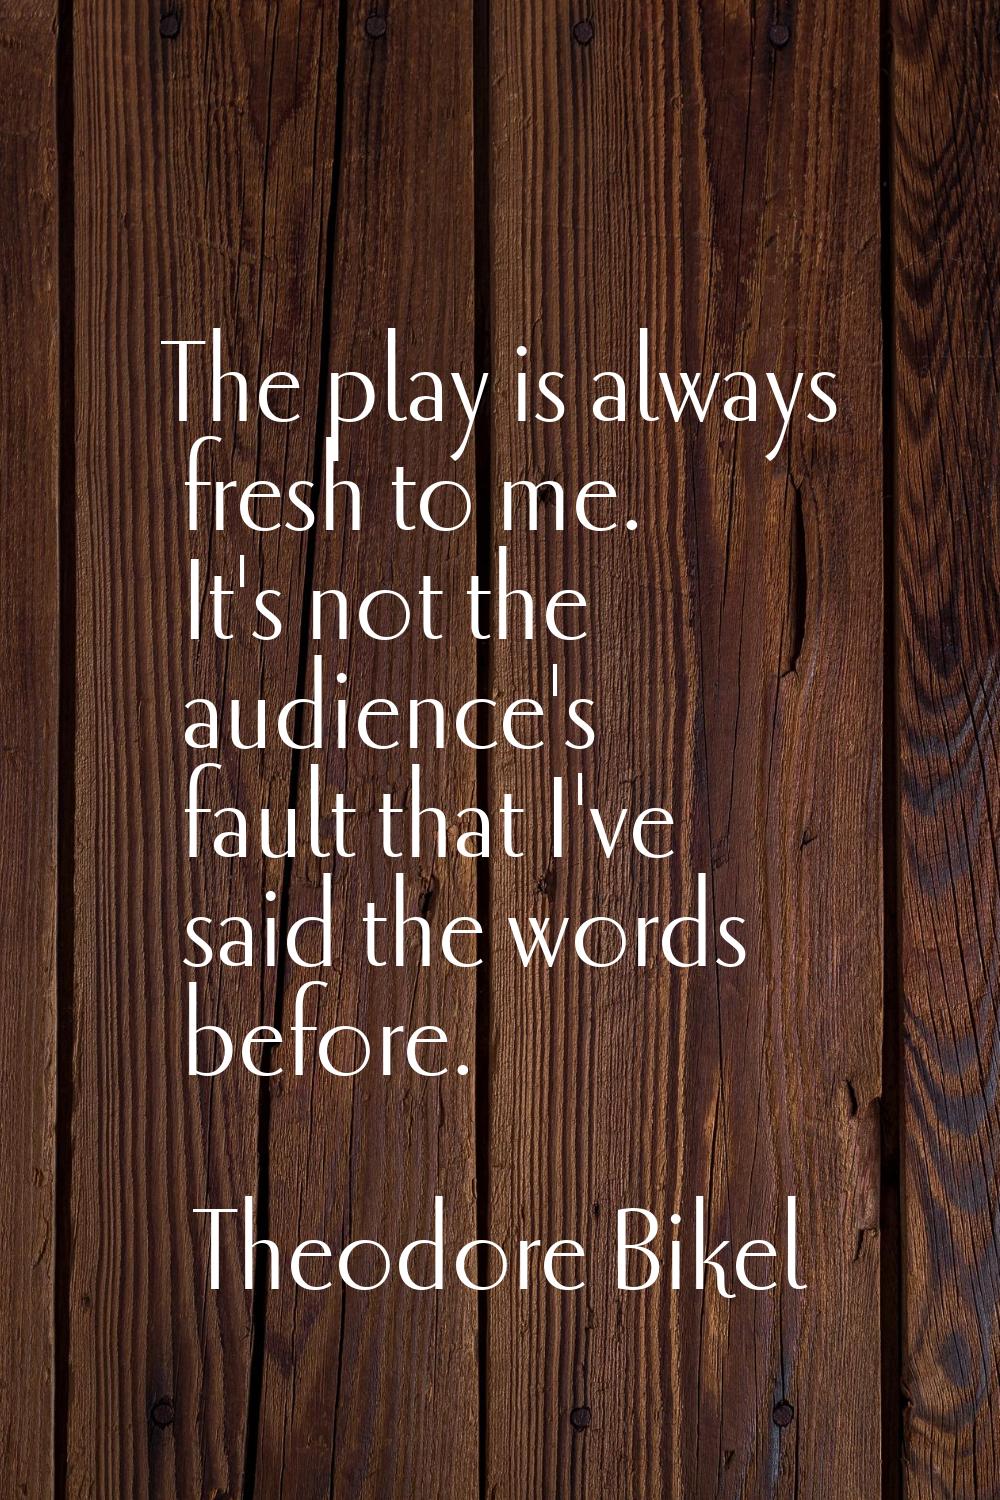 The play is always fresh to me. It's not the audience's fault that I've said the words before.